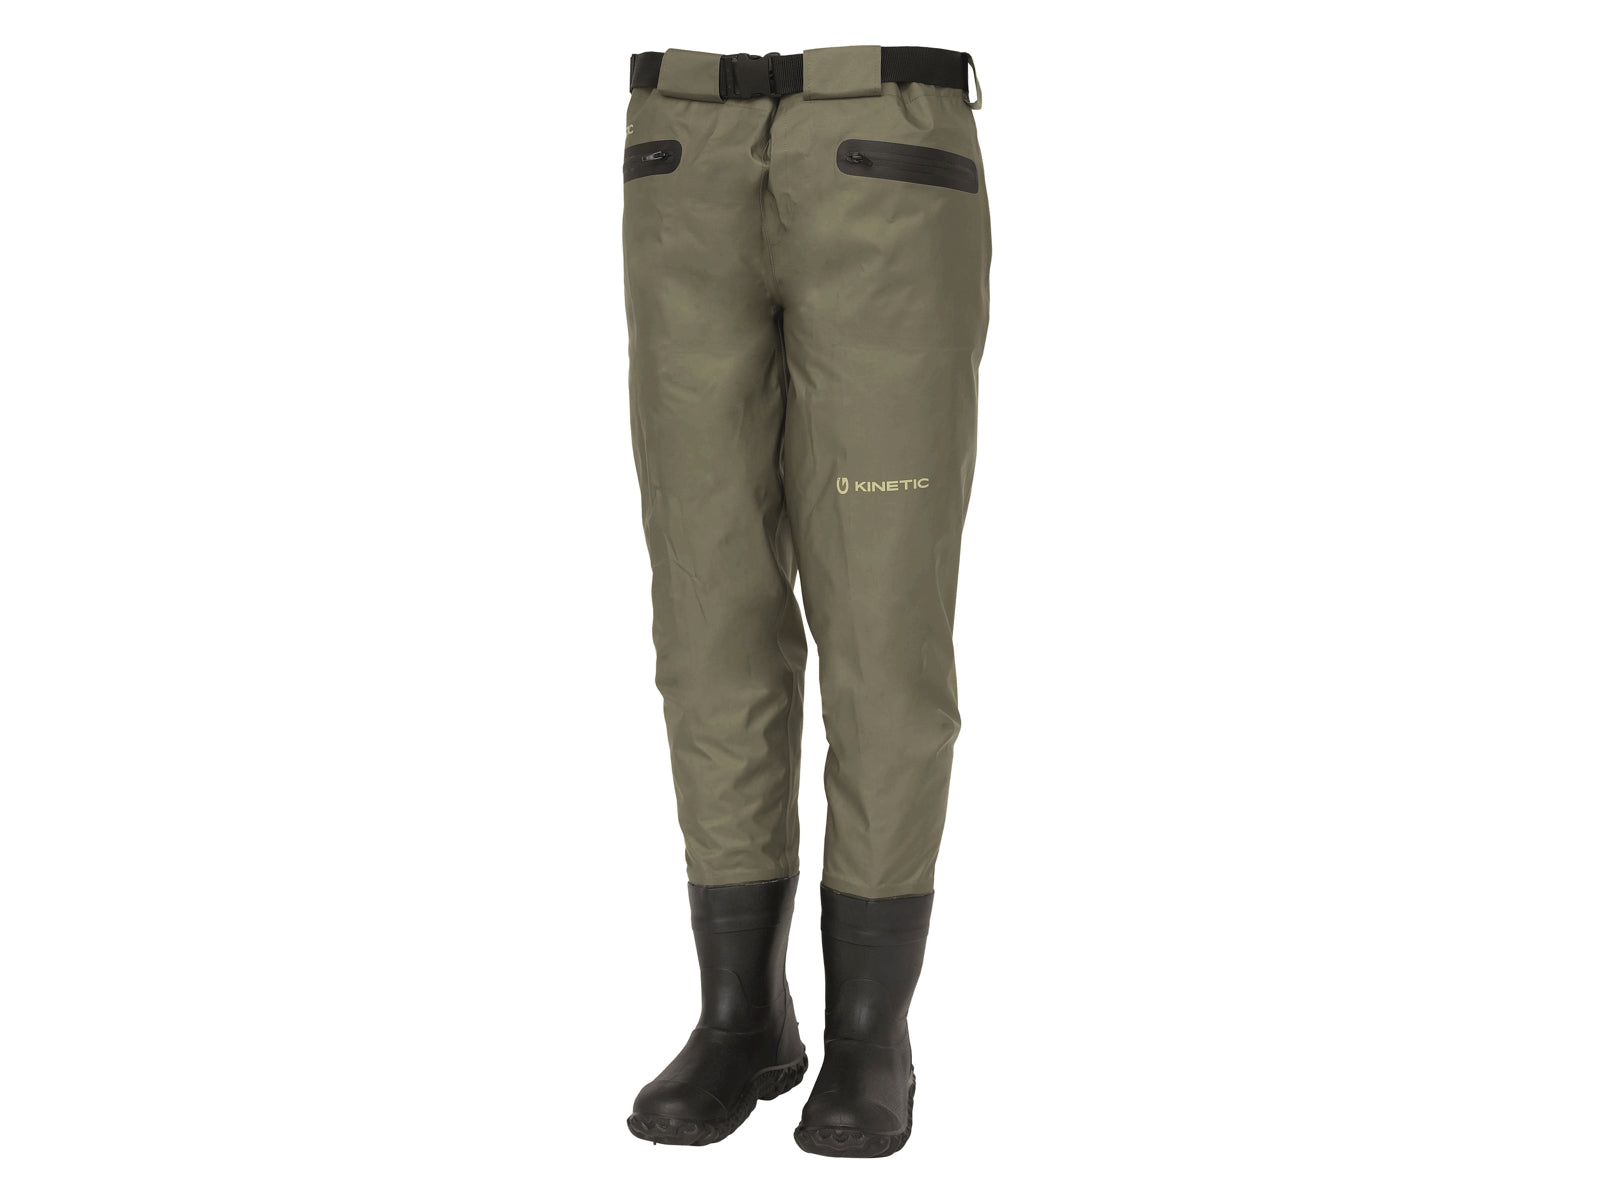 Kinetic ClassicGaiter Breathable Bootfoot Pant